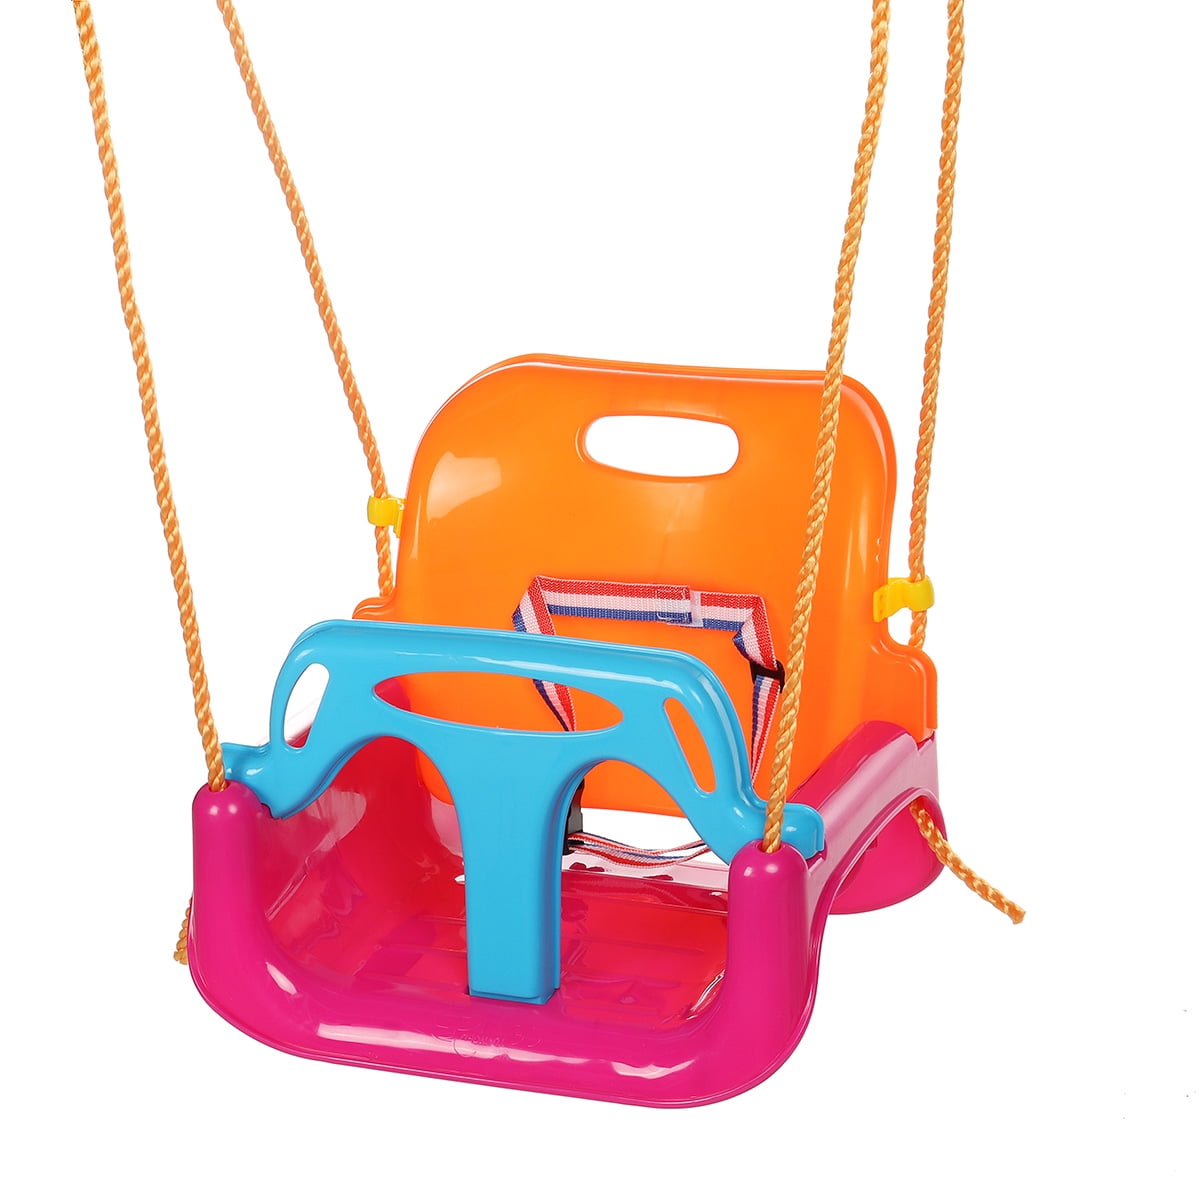 3 Colours Children’s Toddler/Baby Adjustable Bucket Swing Seat by Rebo 